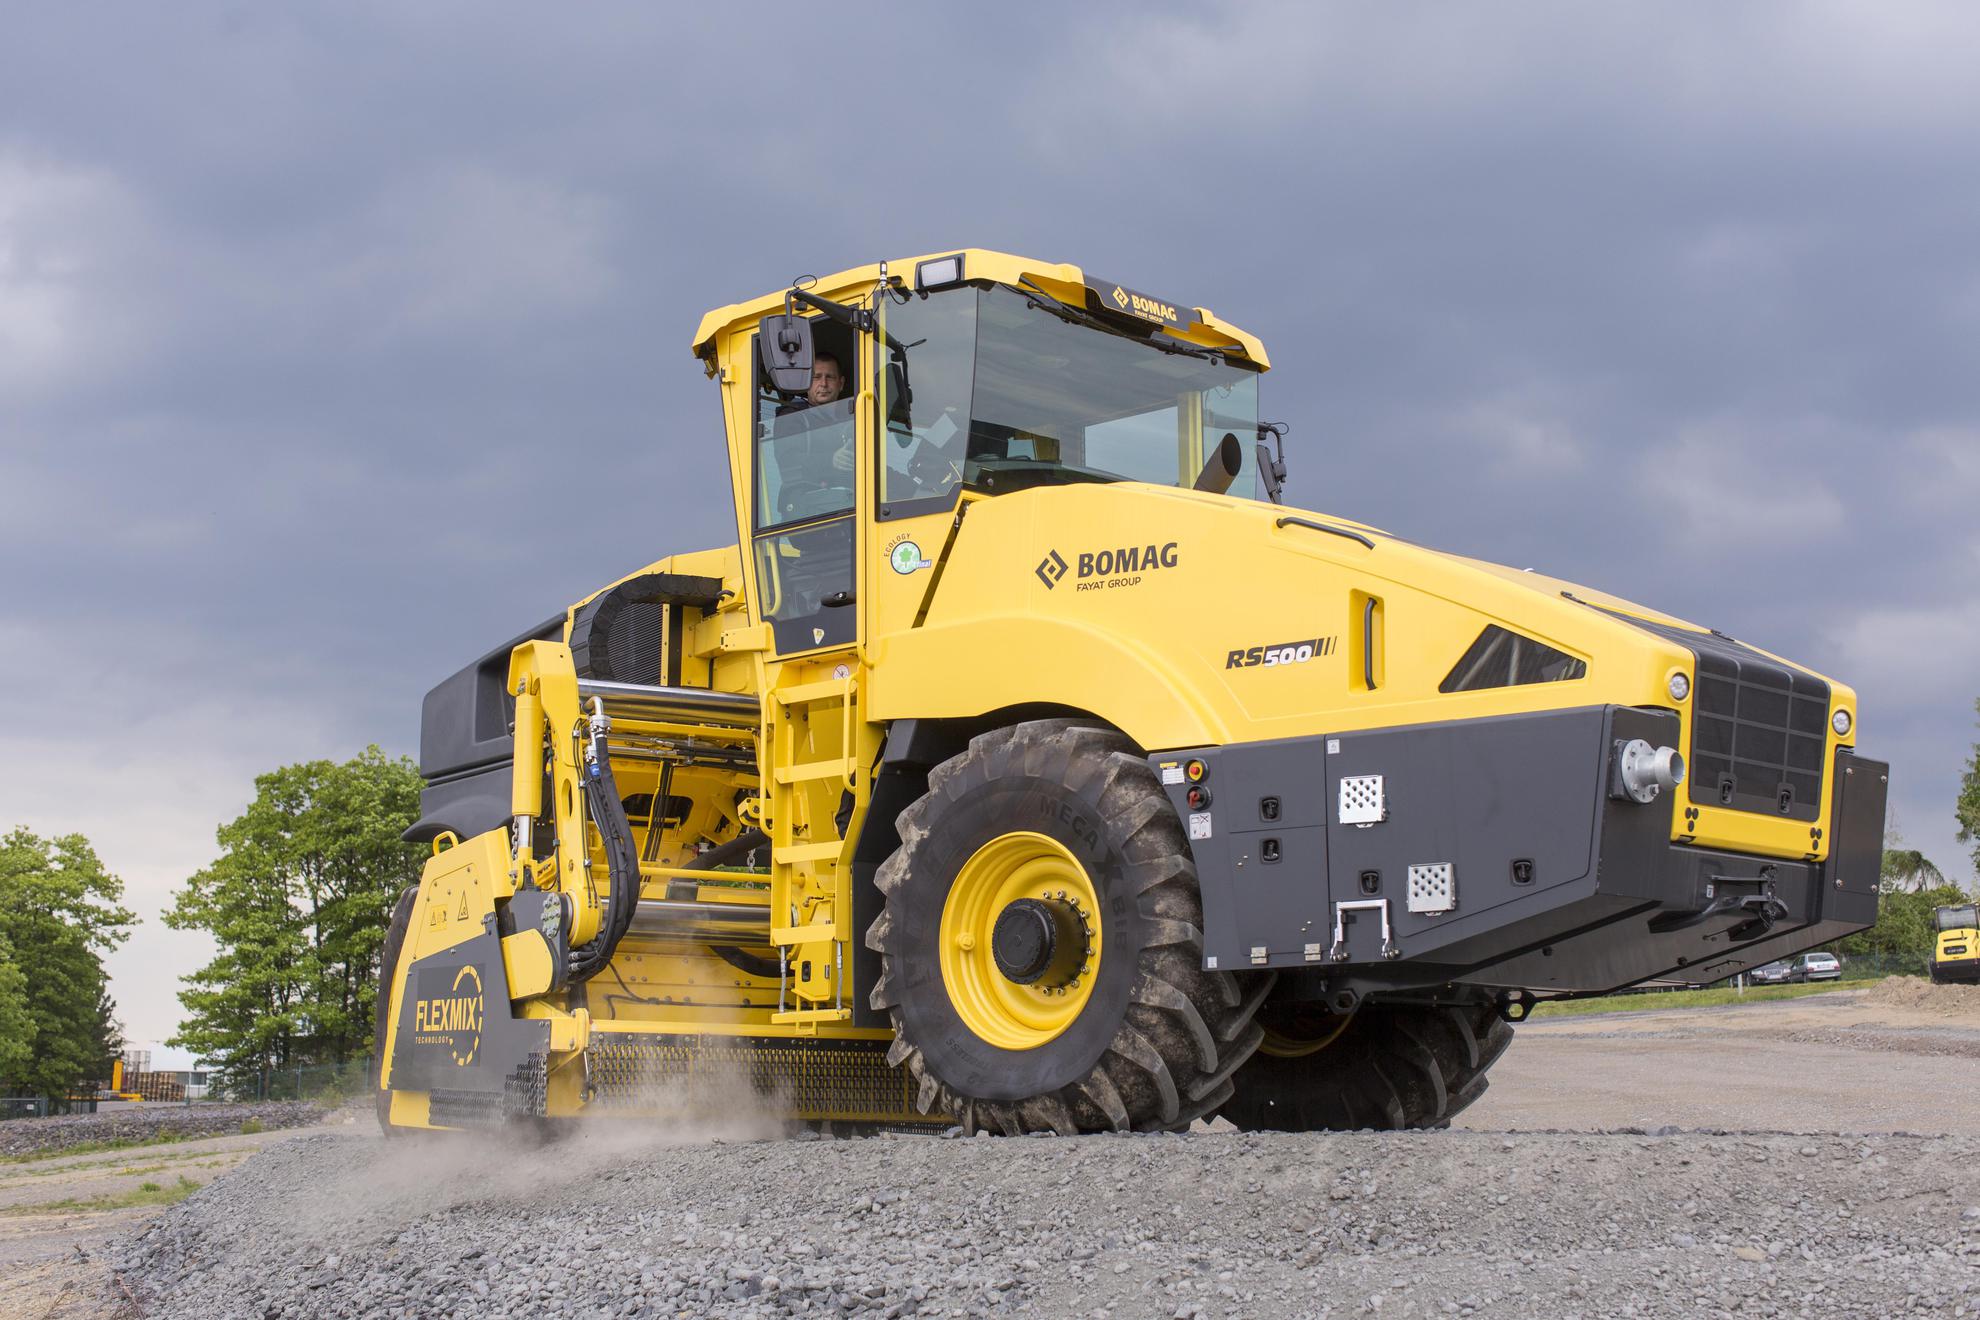 BOMAG RS 500